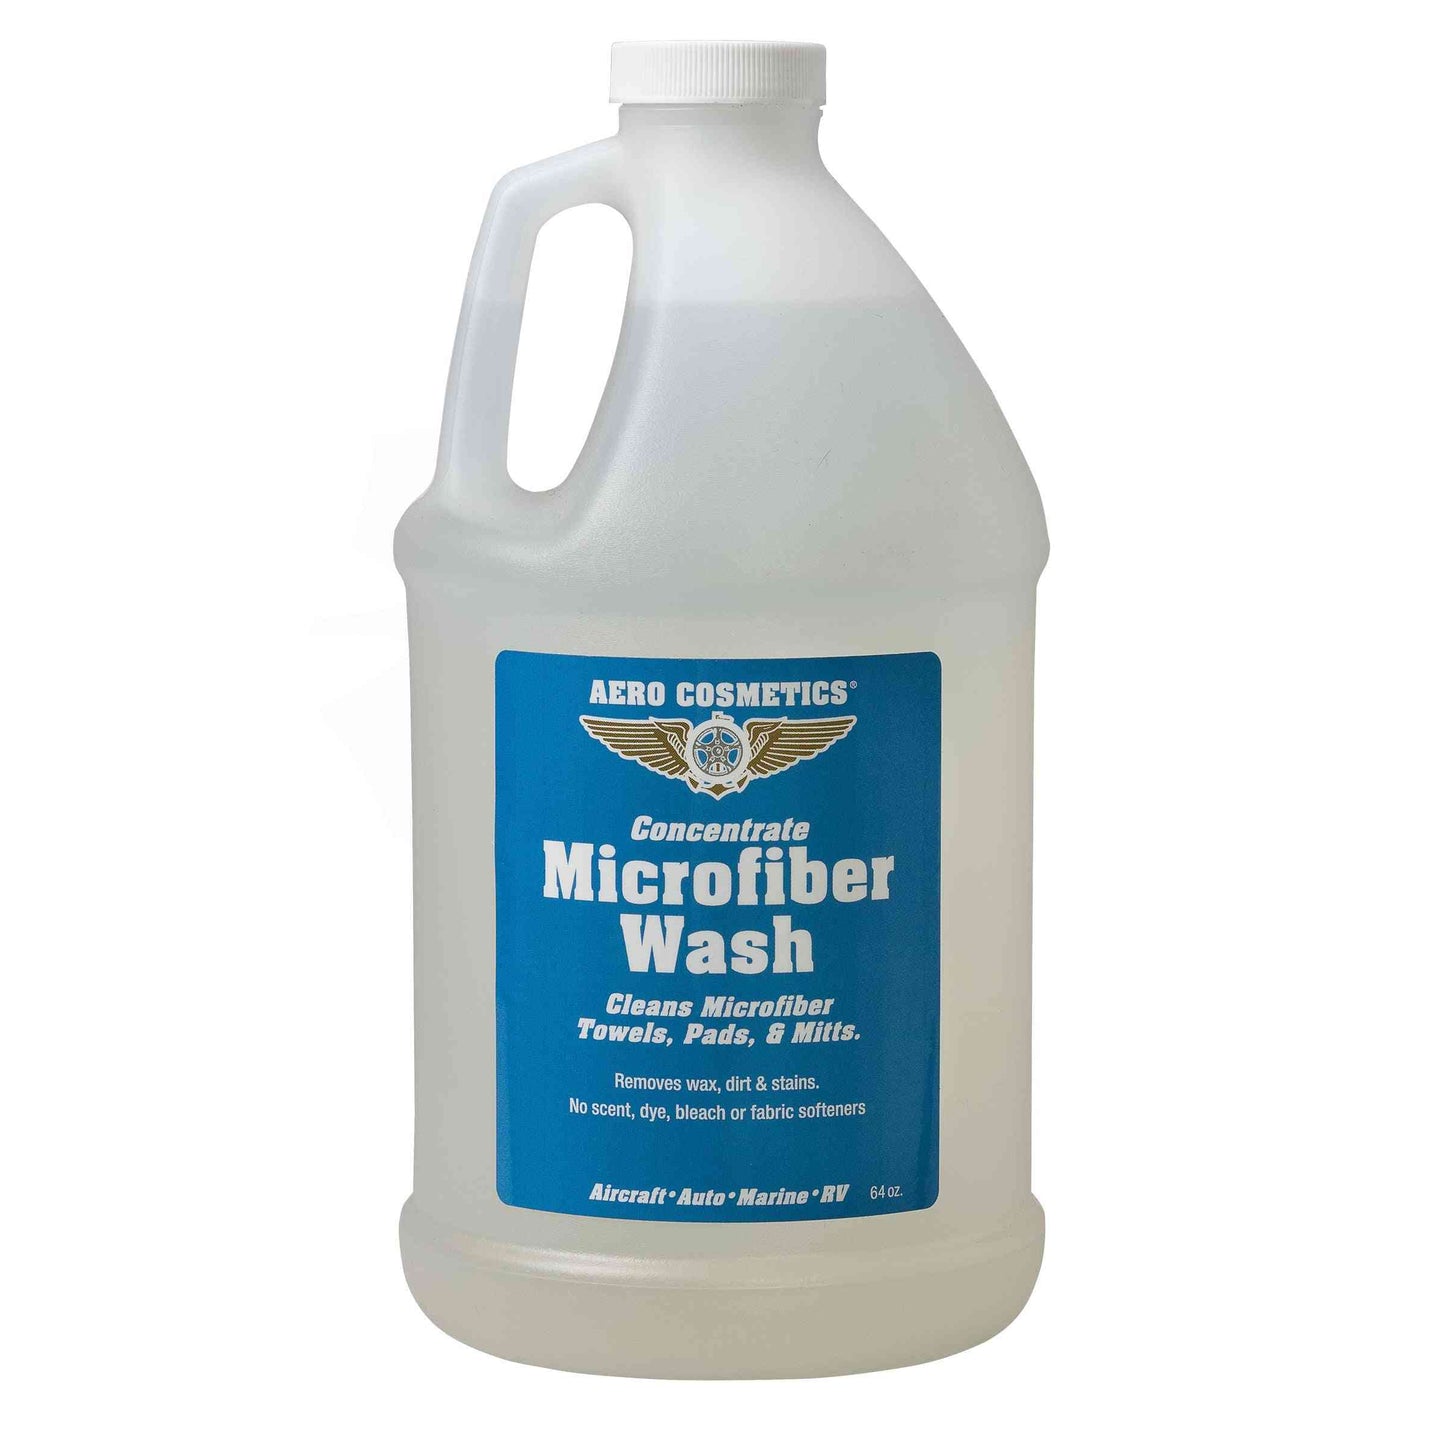 Microfiber Wash 1/2 Gallon - Cleans Microfiber Towels, Pads, & Mitts